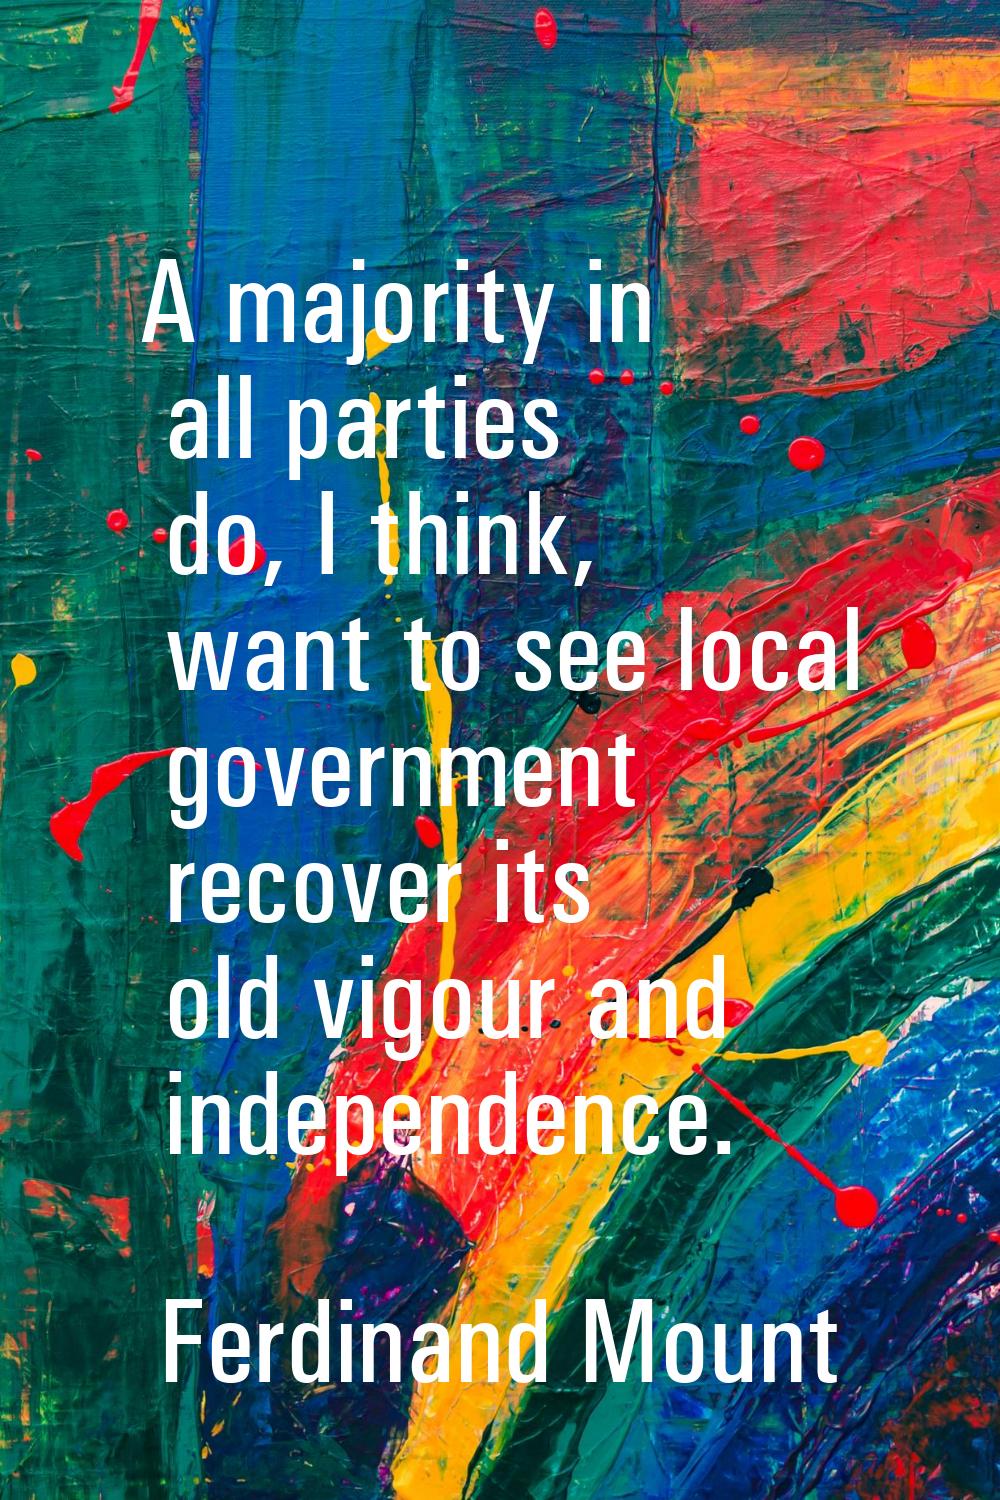 A majority in all parties do, I think, want to see local government recover its old vigour and inde